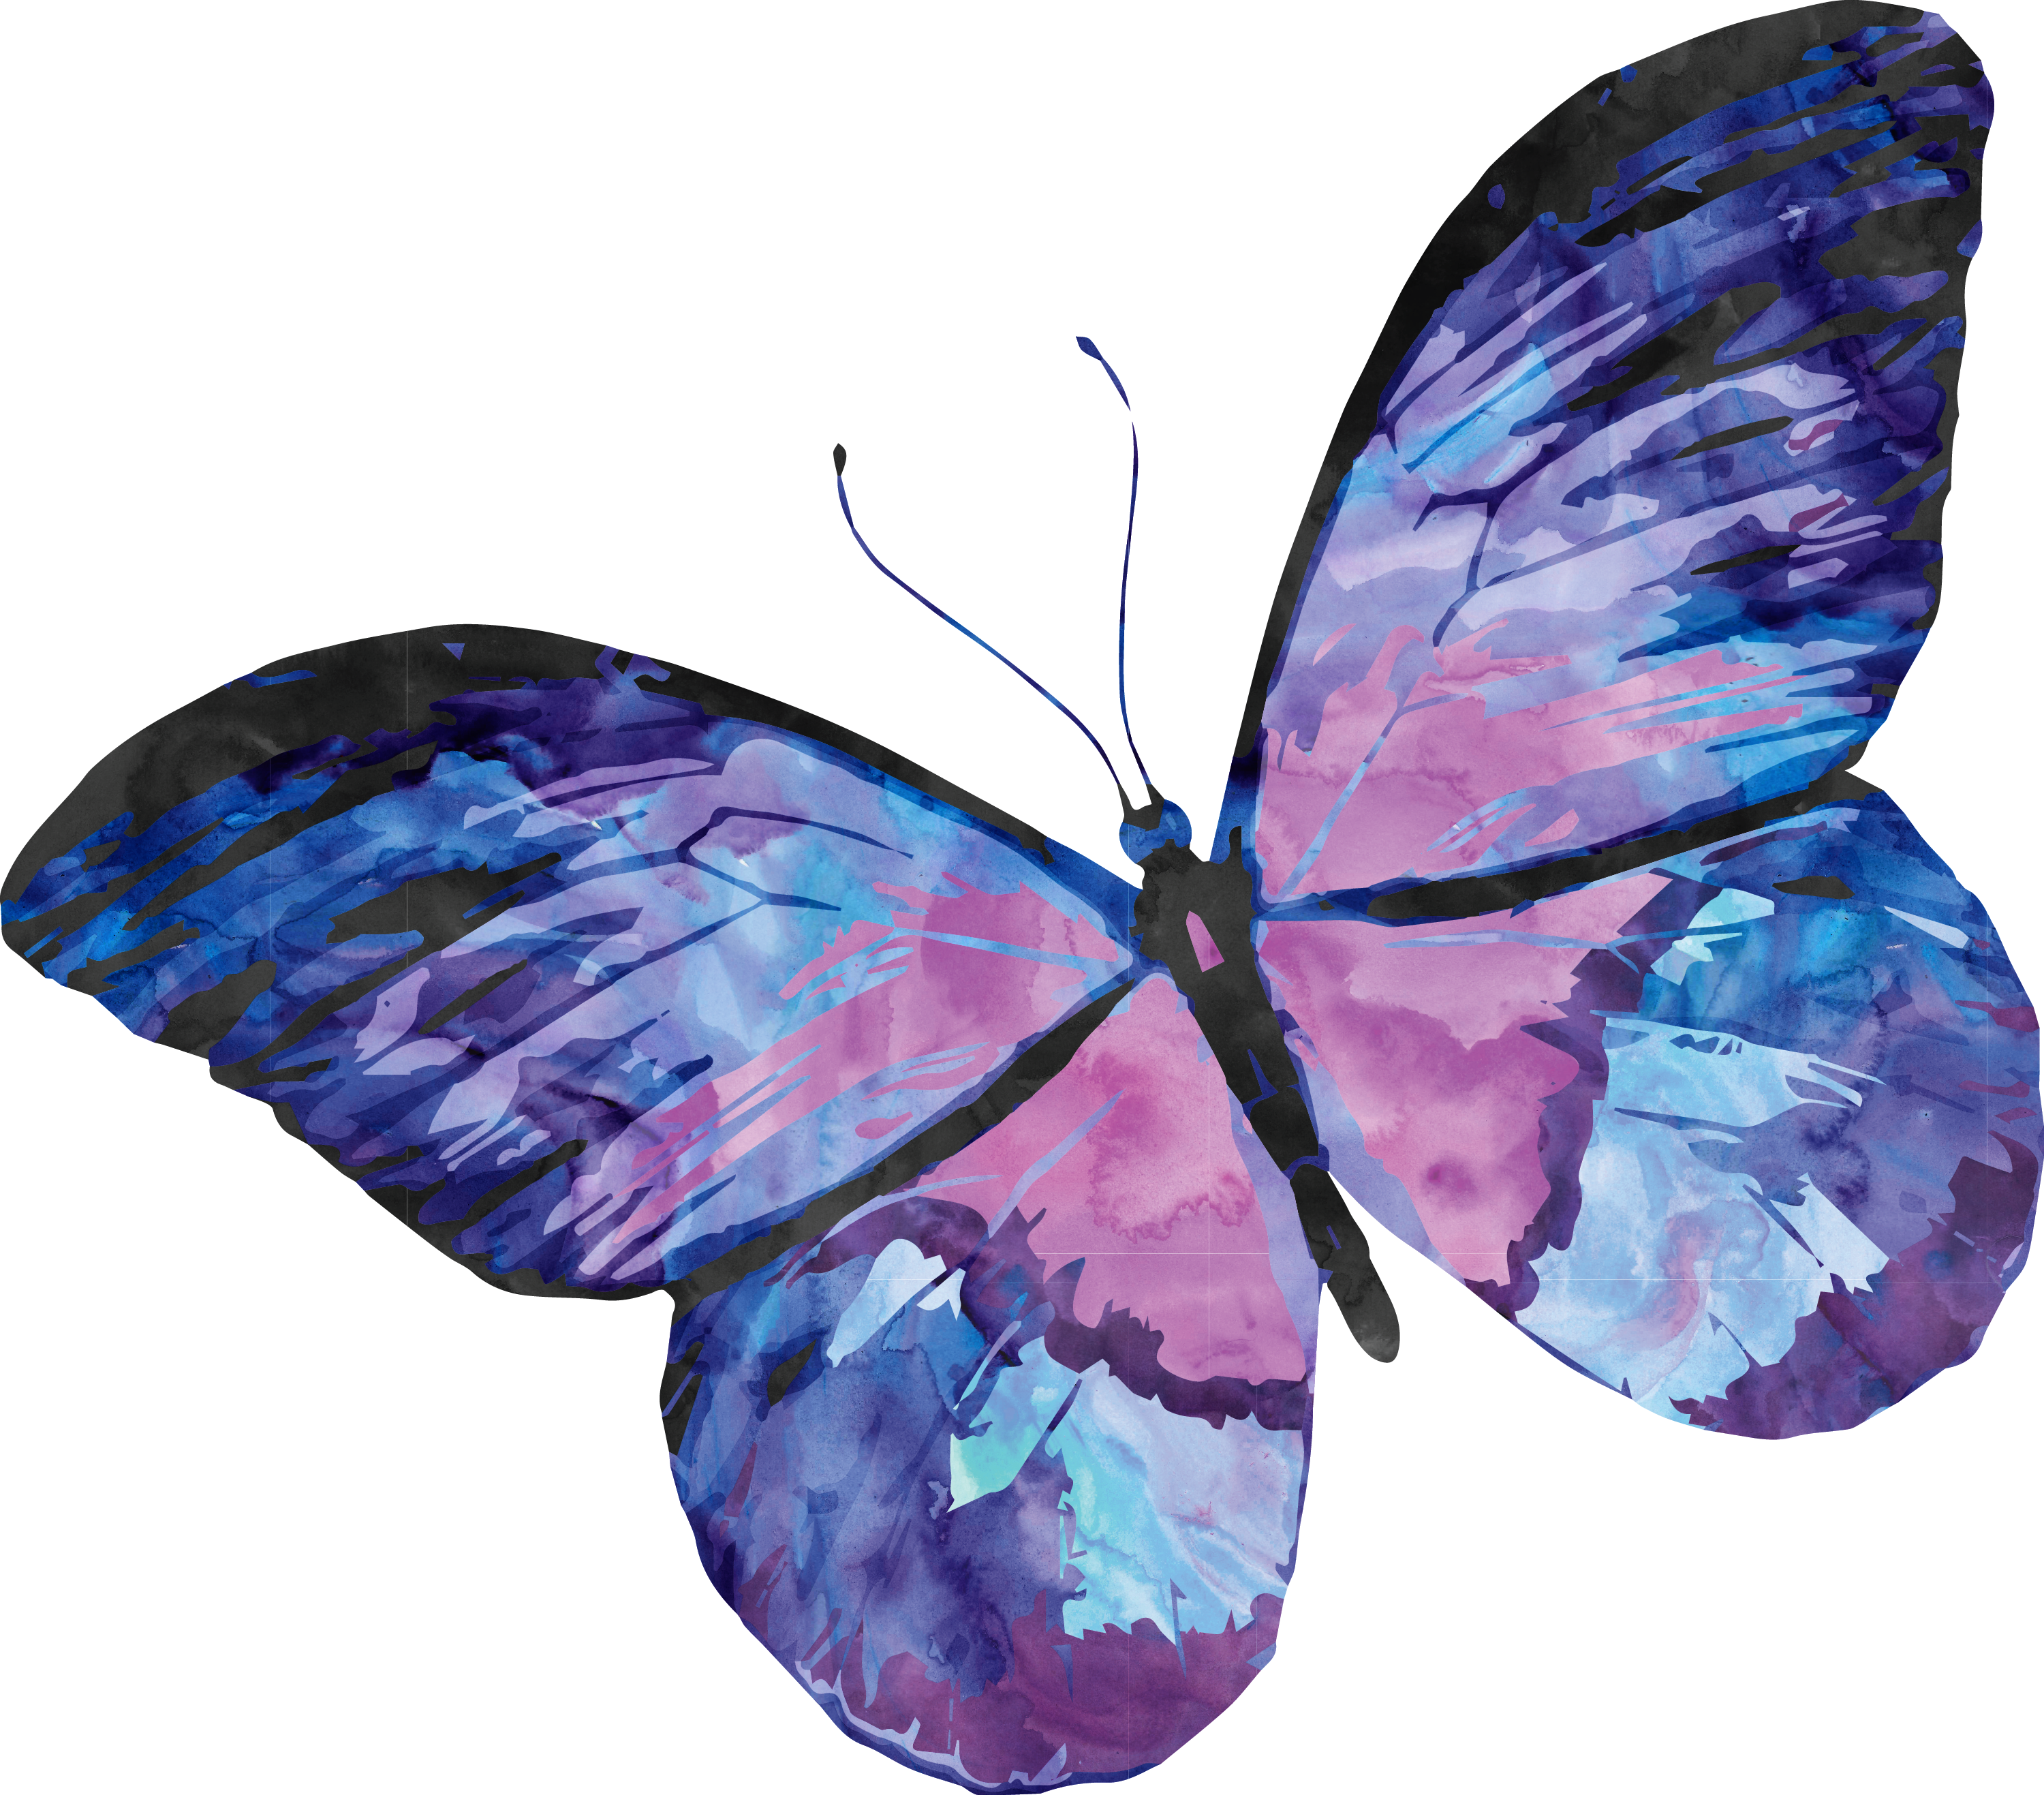 A Butterfly With Blue And Purple Wings